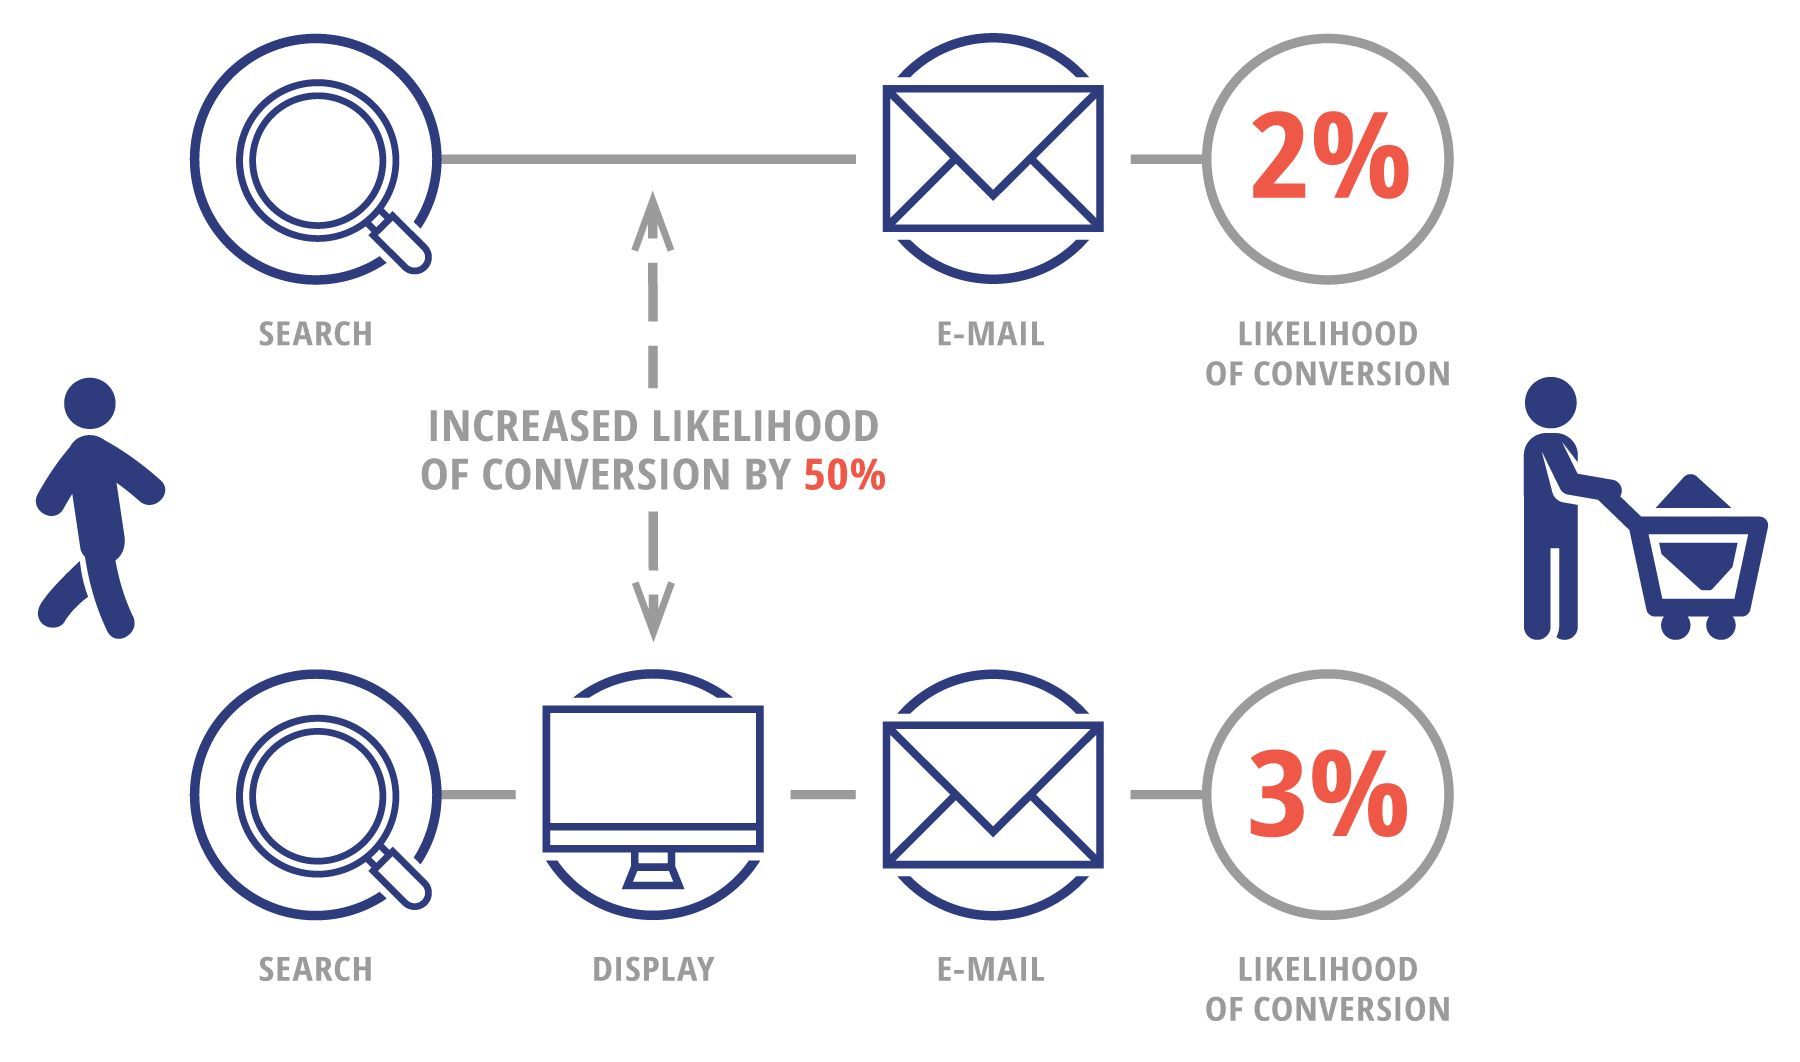 Combination of search and e-mail has 2 percent probability of conversion. If there is also display on the path, the probability increases to 3 percent. Display increases the probability of conversion by 50 percent.